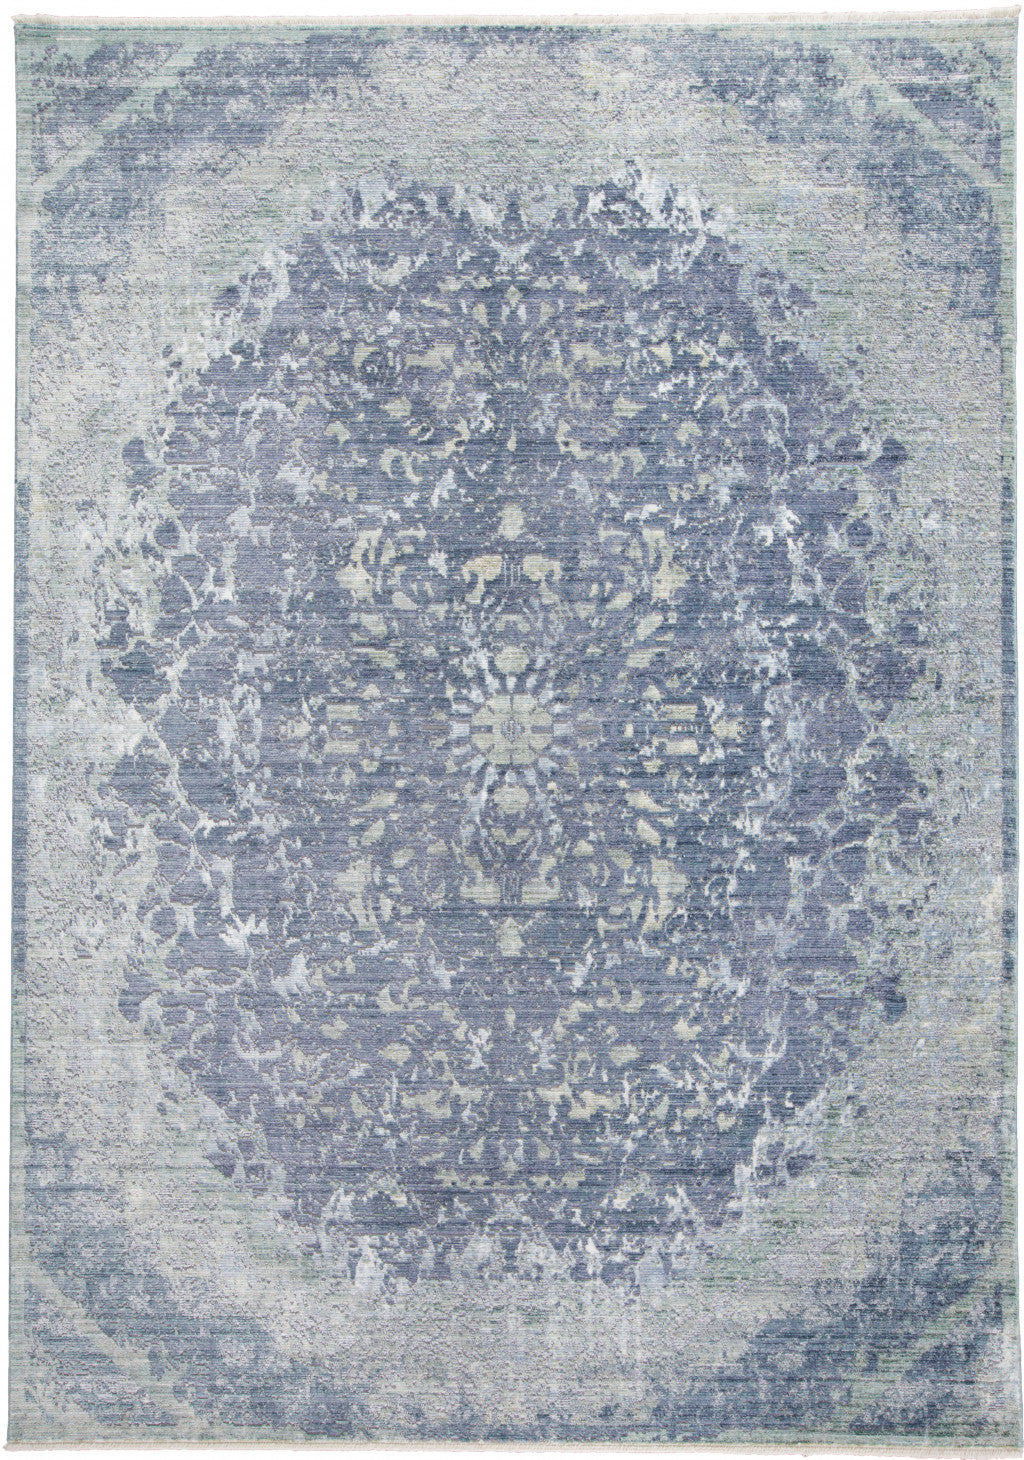 4' X 6' Blue Gray And Silver Abstract Distressed Area Rug With Fringe